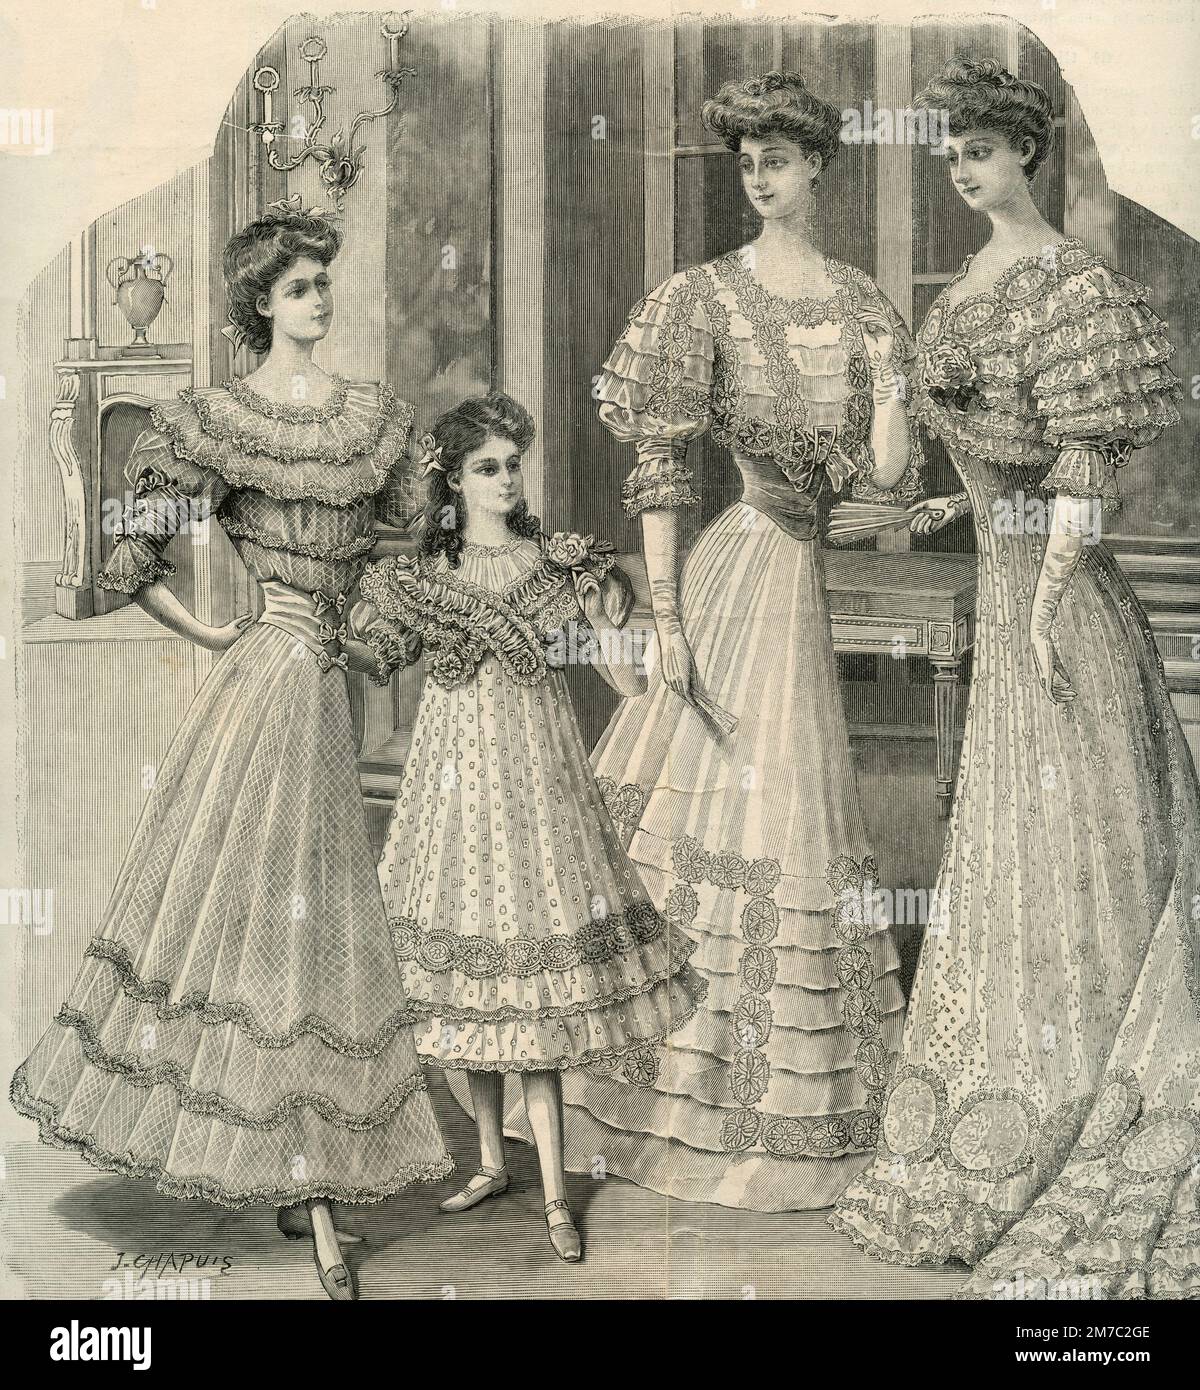 Illustration of women clothes fashion and style from vintage magazine,  Italy 1900s Stock Photo - Alamy